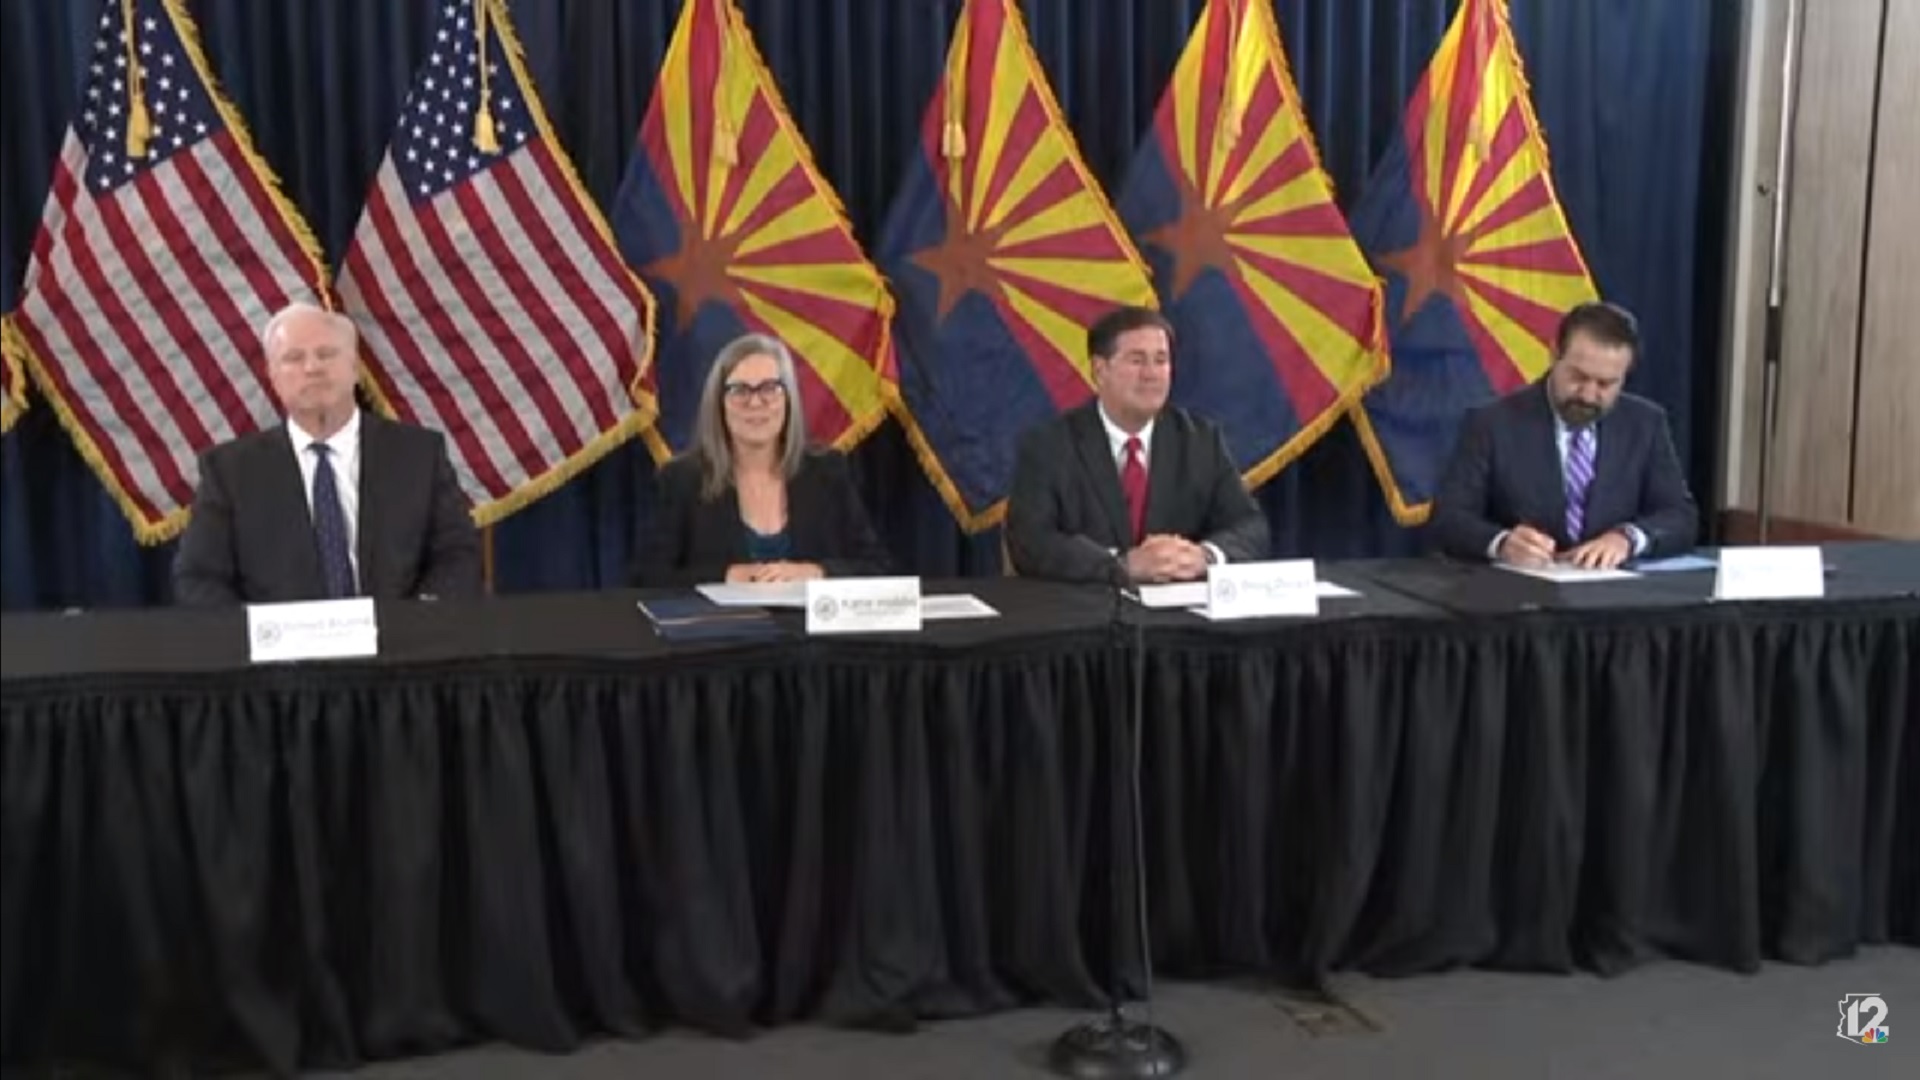 Chief Justice Robert M. Brutinel, Secretary of State Katie Hobbs, Governor Doug Ducey, and Attorney General Mark Brnovich prepare to sign canvassing paperwork certifying the results of the 2022 general election at the state capitol on Monday December 5, 2022.